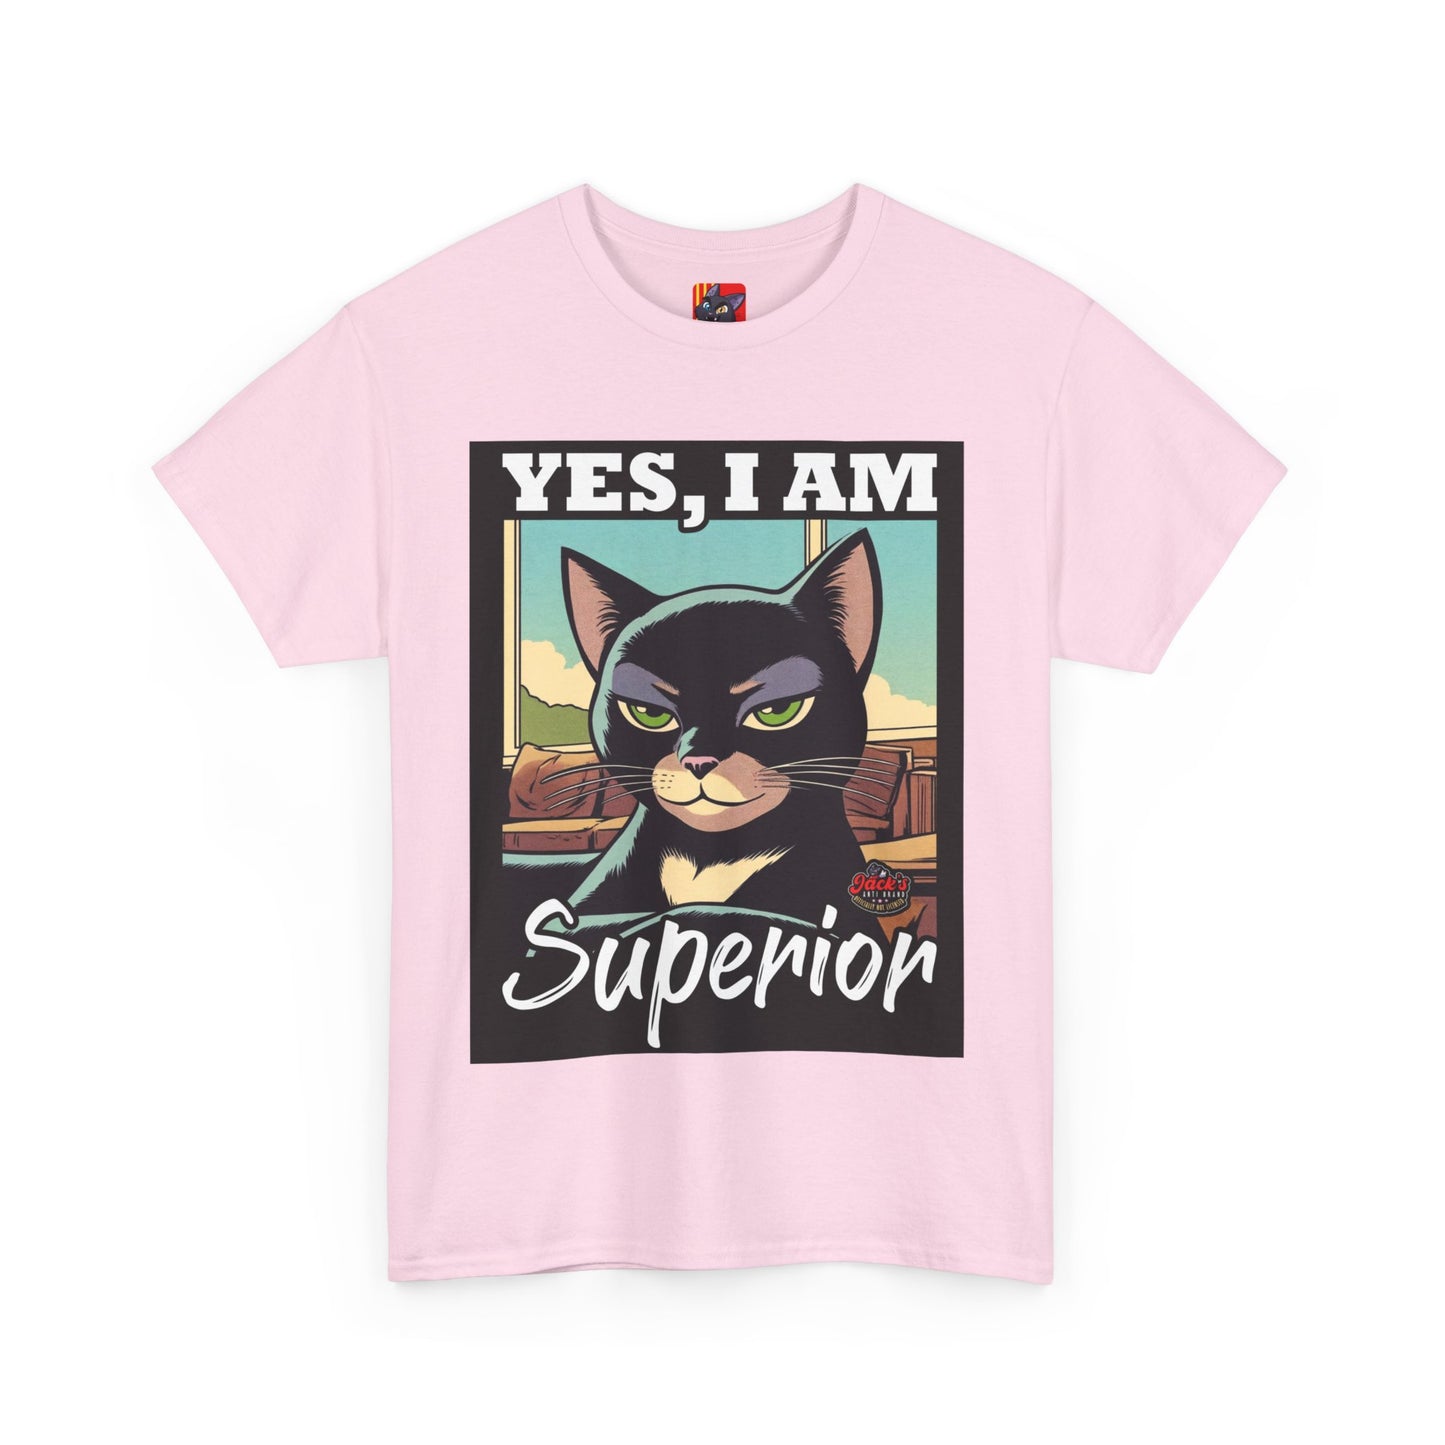 The Be You T-Shirt: Yes , I am superior